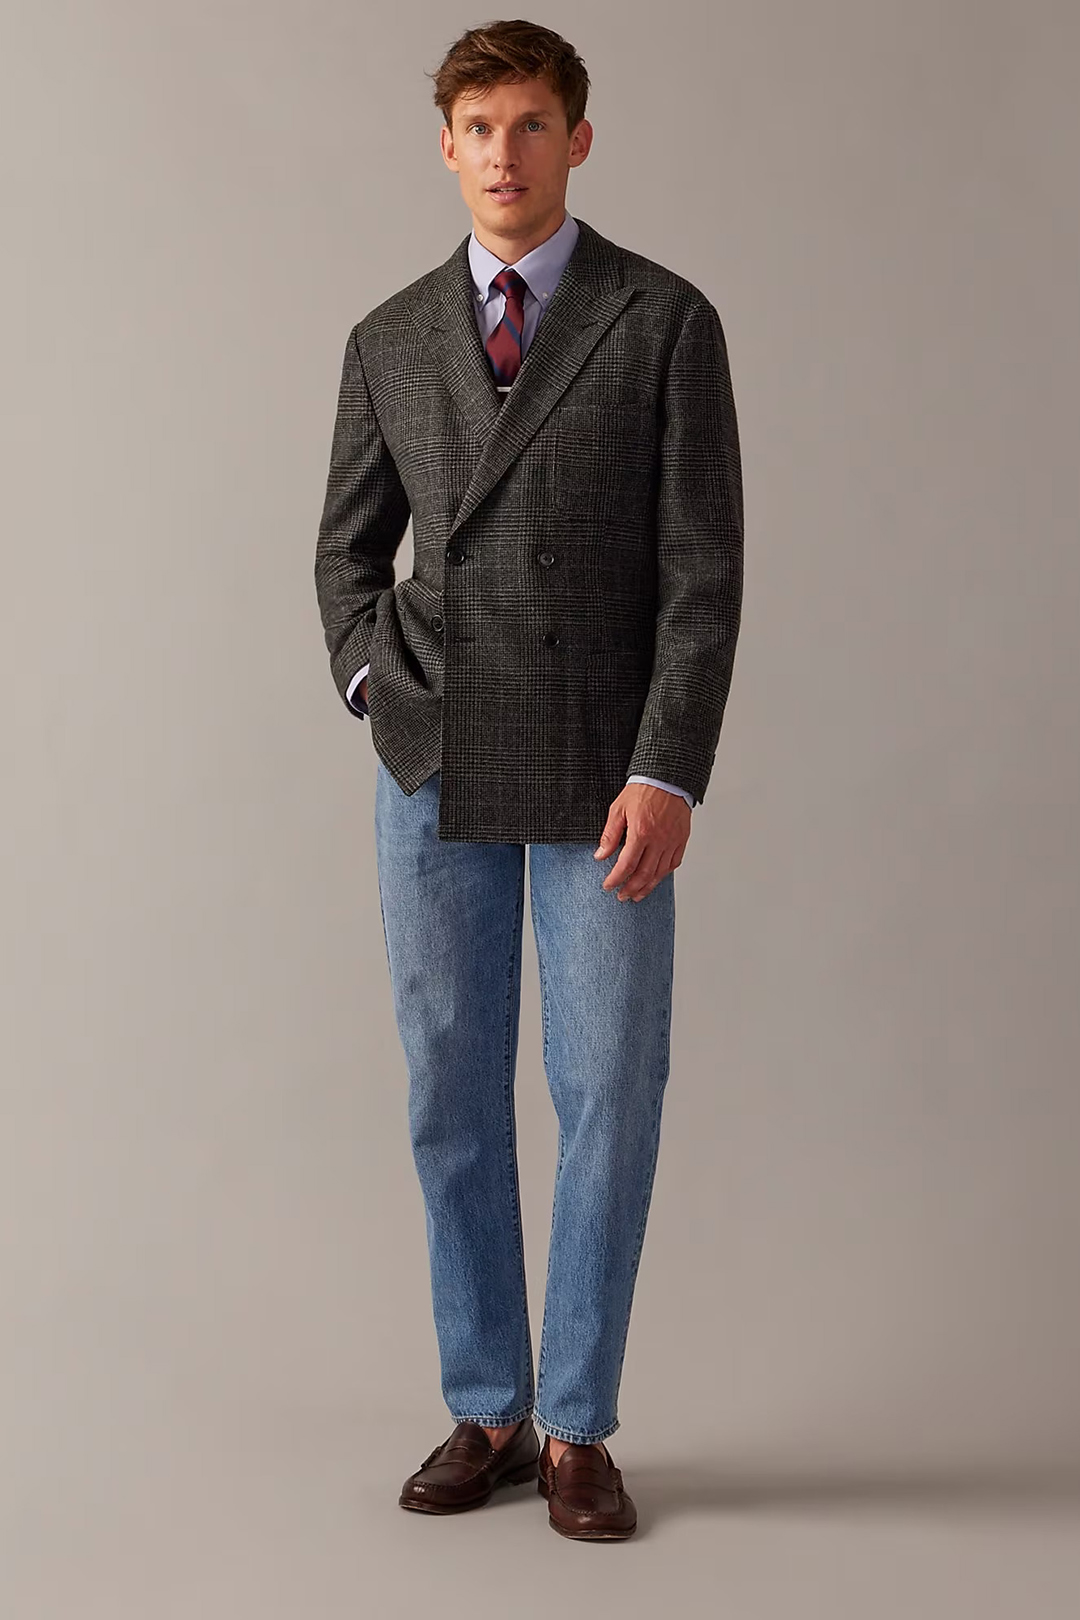 Charcoal double-breasted blazer, light blue dress shirt, burgundy striped tie, blue jeans, and dark brown loafers outfit